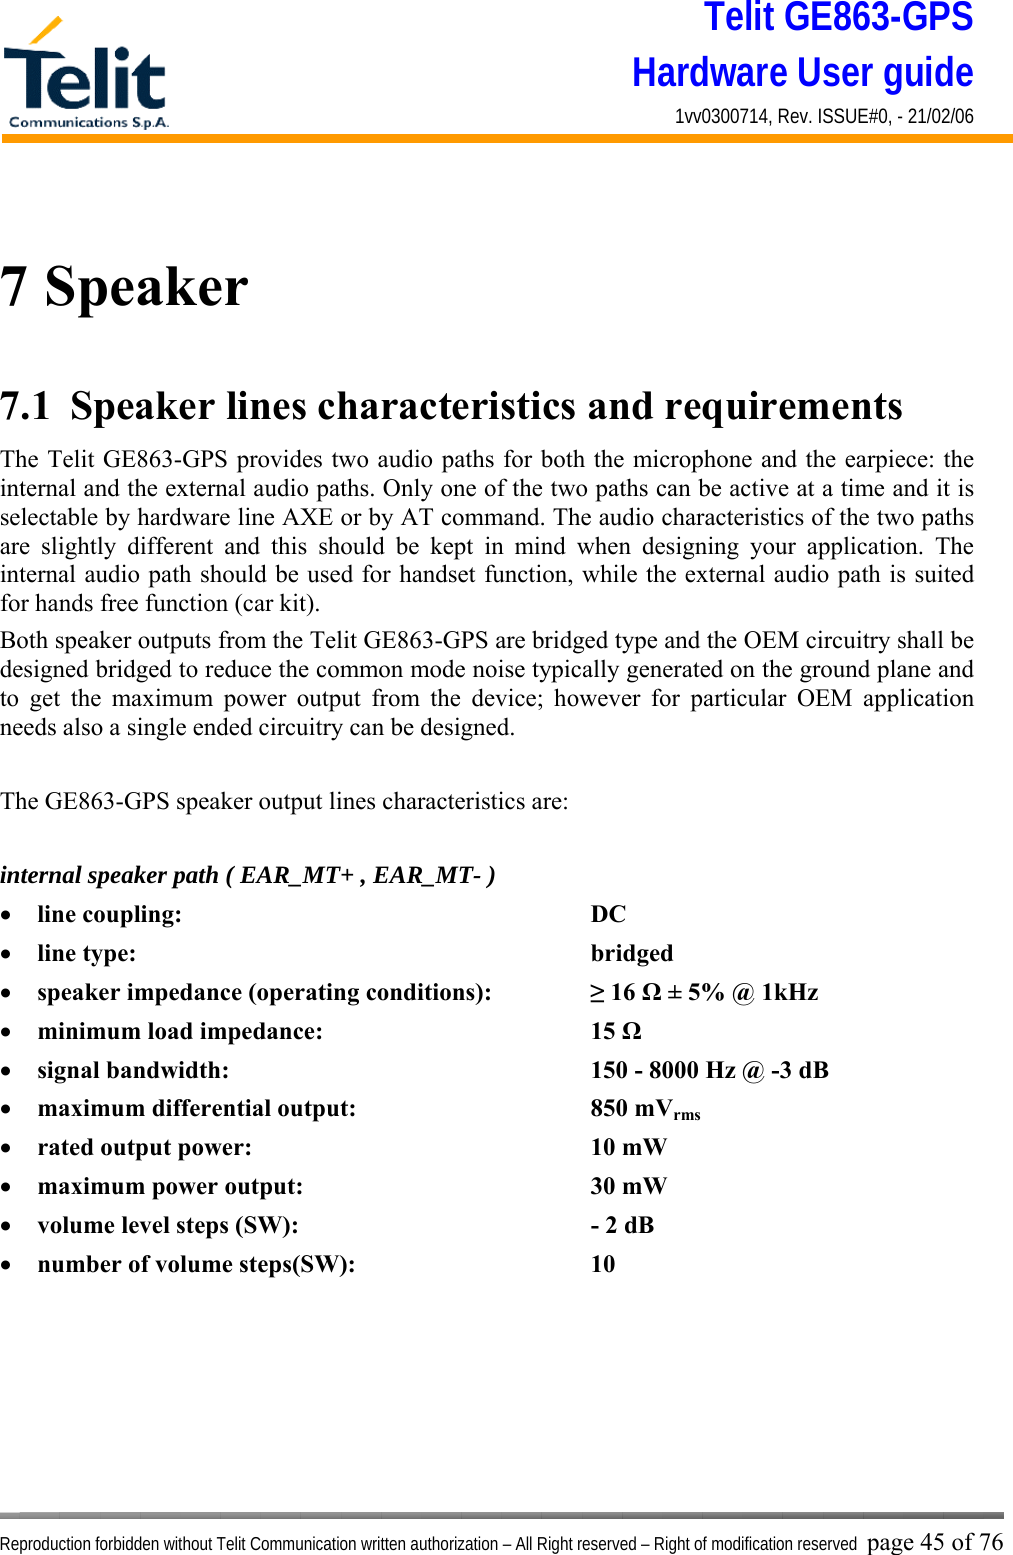 Telit GE863-GPS Hardware User guide 1vv0300714, Rev. ISSUE#0, - 21/02/06    Reproduction forbidden without Telit Communication written authorization – All Right reserved – Right of modification reserved page 45 of 76  7 Speaker 7.1  Speaker lines characteristics and requirements  The Telit GE863-GPS provides two audio paths for both the microphone and the earpiece: the internal and the external audio paths. Only one of the two paths can be active at a time and it is selectable by hardware line AXE or by AT command. The audio characteristics of the two paths are slightly different and this should be kept in mind when designing your application. The internal audio path should be used for handset function, while the external audio path is suited for hands free function (car kit). Both speaker outputs from the Telit GE863-GPS are bridged type and the OEM circuitry shall be designed bridged to reduce the common mode noise typically generated on the ground plane and to get the maximum power output from the device; however for particular OEM application needs also a single ended circuitry can be designed.  The GE863-GPS speaker output lines characteristics are:  internal speaker path ( EAR_MT+ , EAR_MT- ) •  line coupling:      DC  •  line type:       bridged •  speaker impedance (operating conditions):    ≥ 16 Ω ± 5% @ 1kHz •  minimum load impedance:    15 Ω •  signal bandwidth:          150 - 8000 Hz @ -3 dB  •  maximum differential output:    850 mVrms •  rated output power:     10 mW •  maximum power output:    30 mW •  volume level steps (SW):        - 2 dB •  number of volume steps(SW):    10       